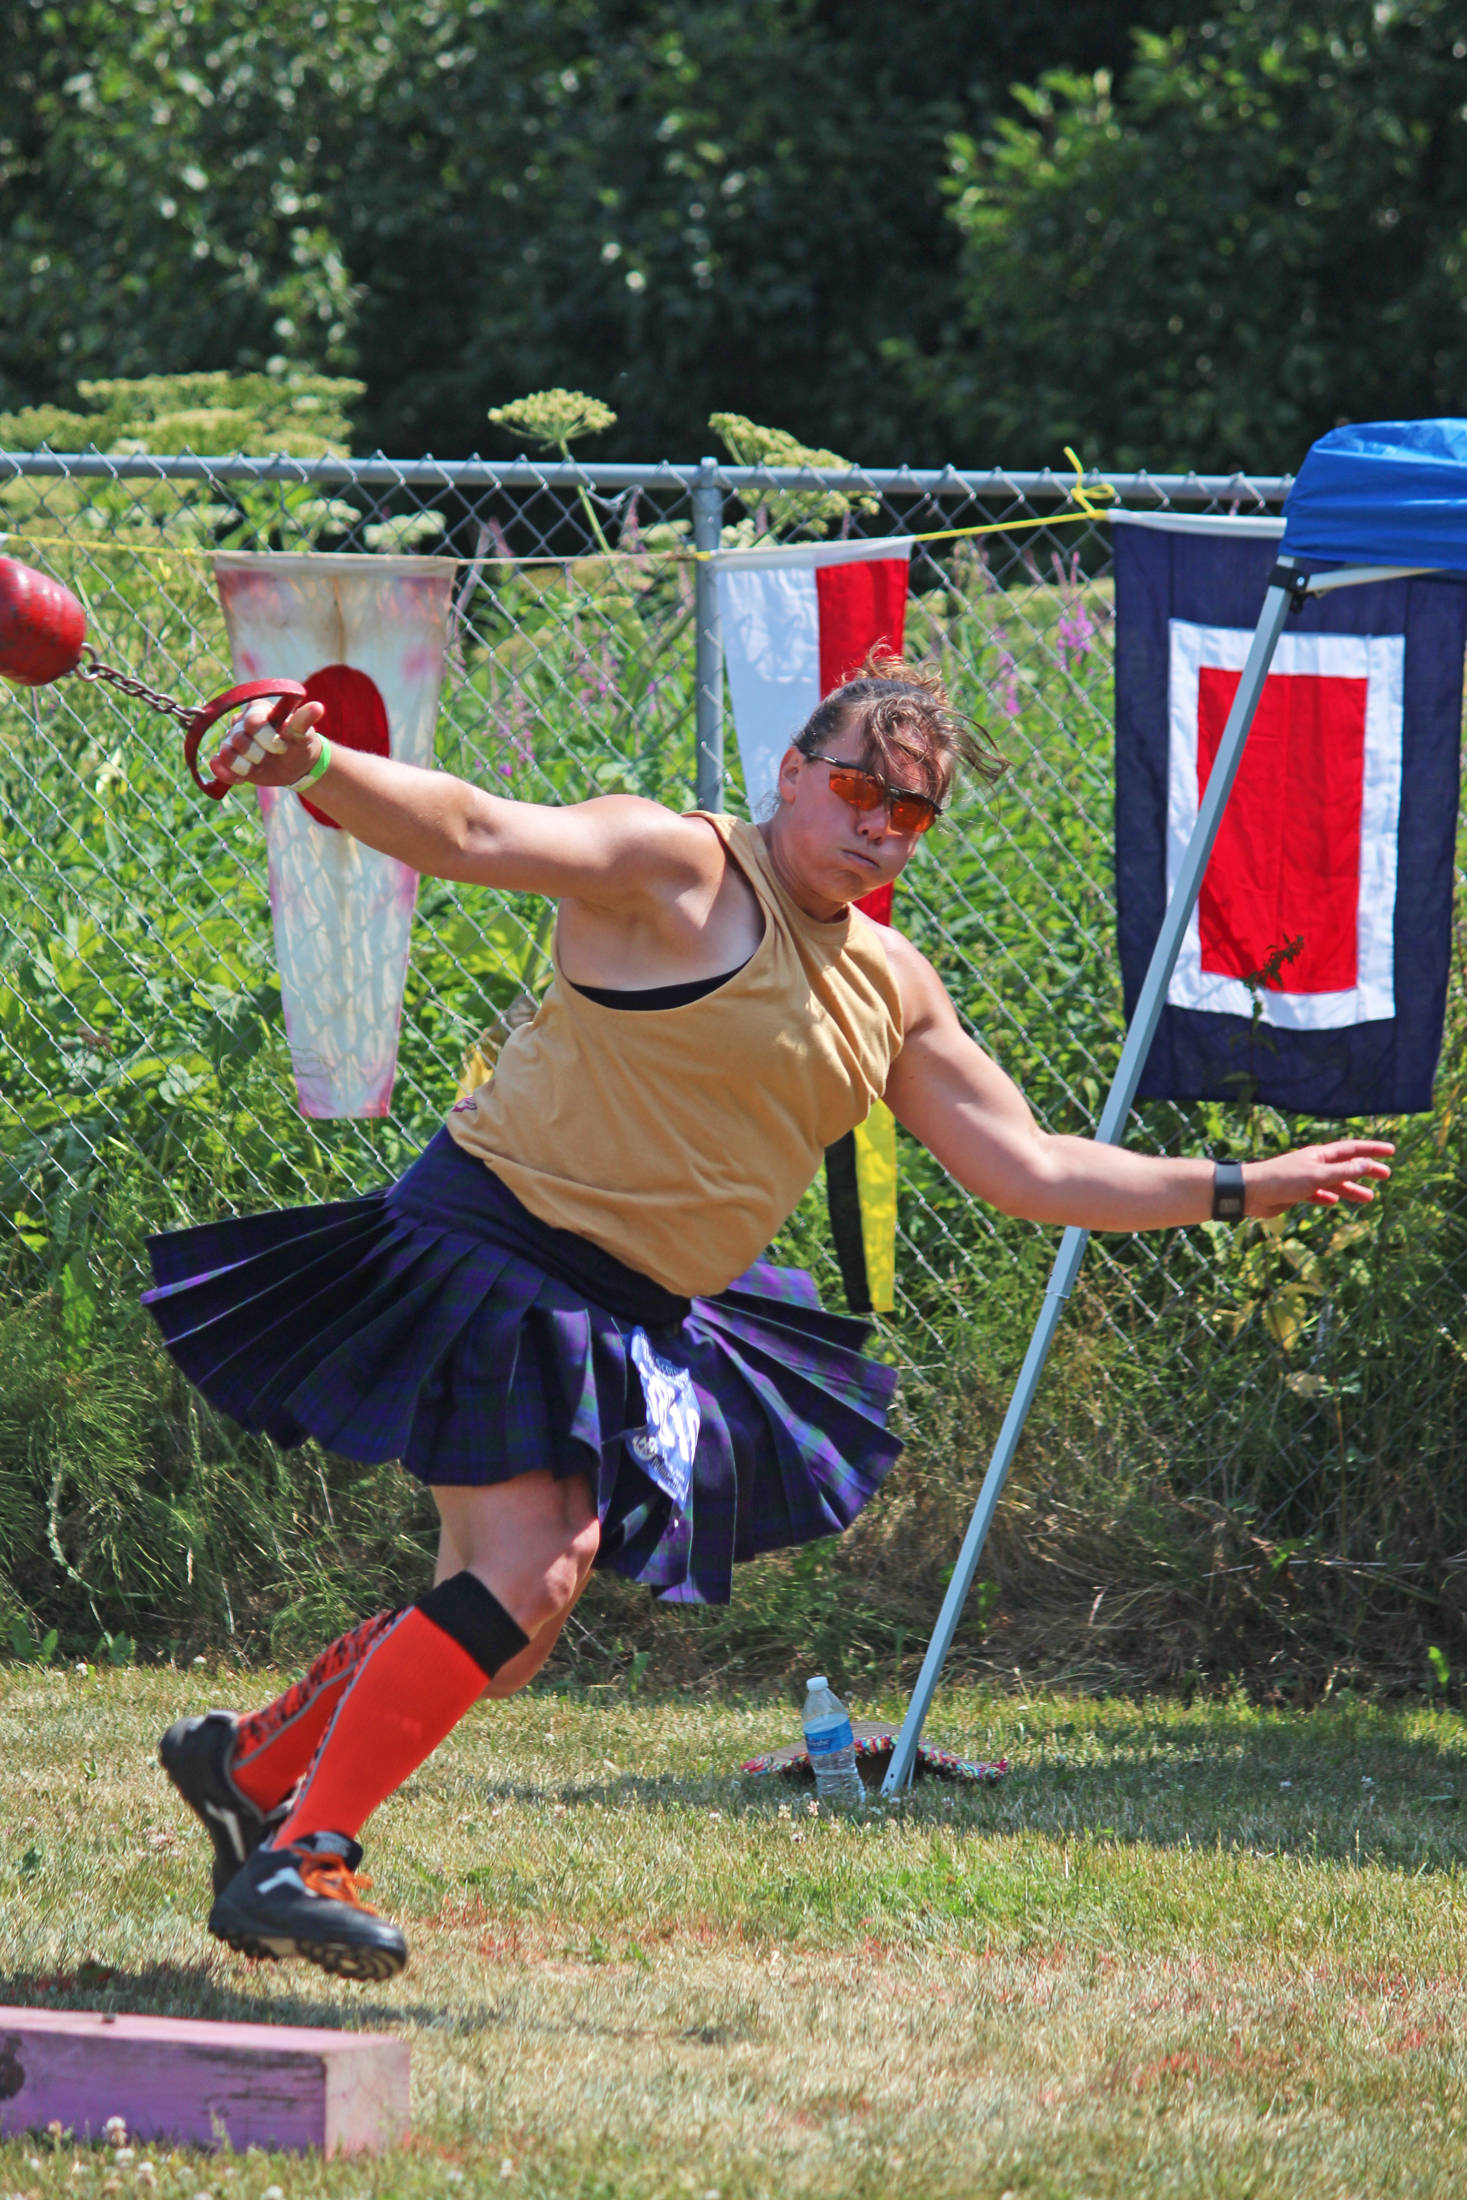 Chrystal Rubert winds up to throw a weight during the women’s weight throw for distance event at this year’s Kachemak Bay Highland Games held Saturday, July 6, 2019 at Karen Hornaday Park in Homer, Alaska. Rubert took first place in the Women’s Open division. (Photo by Megan Pacer/Homer News)